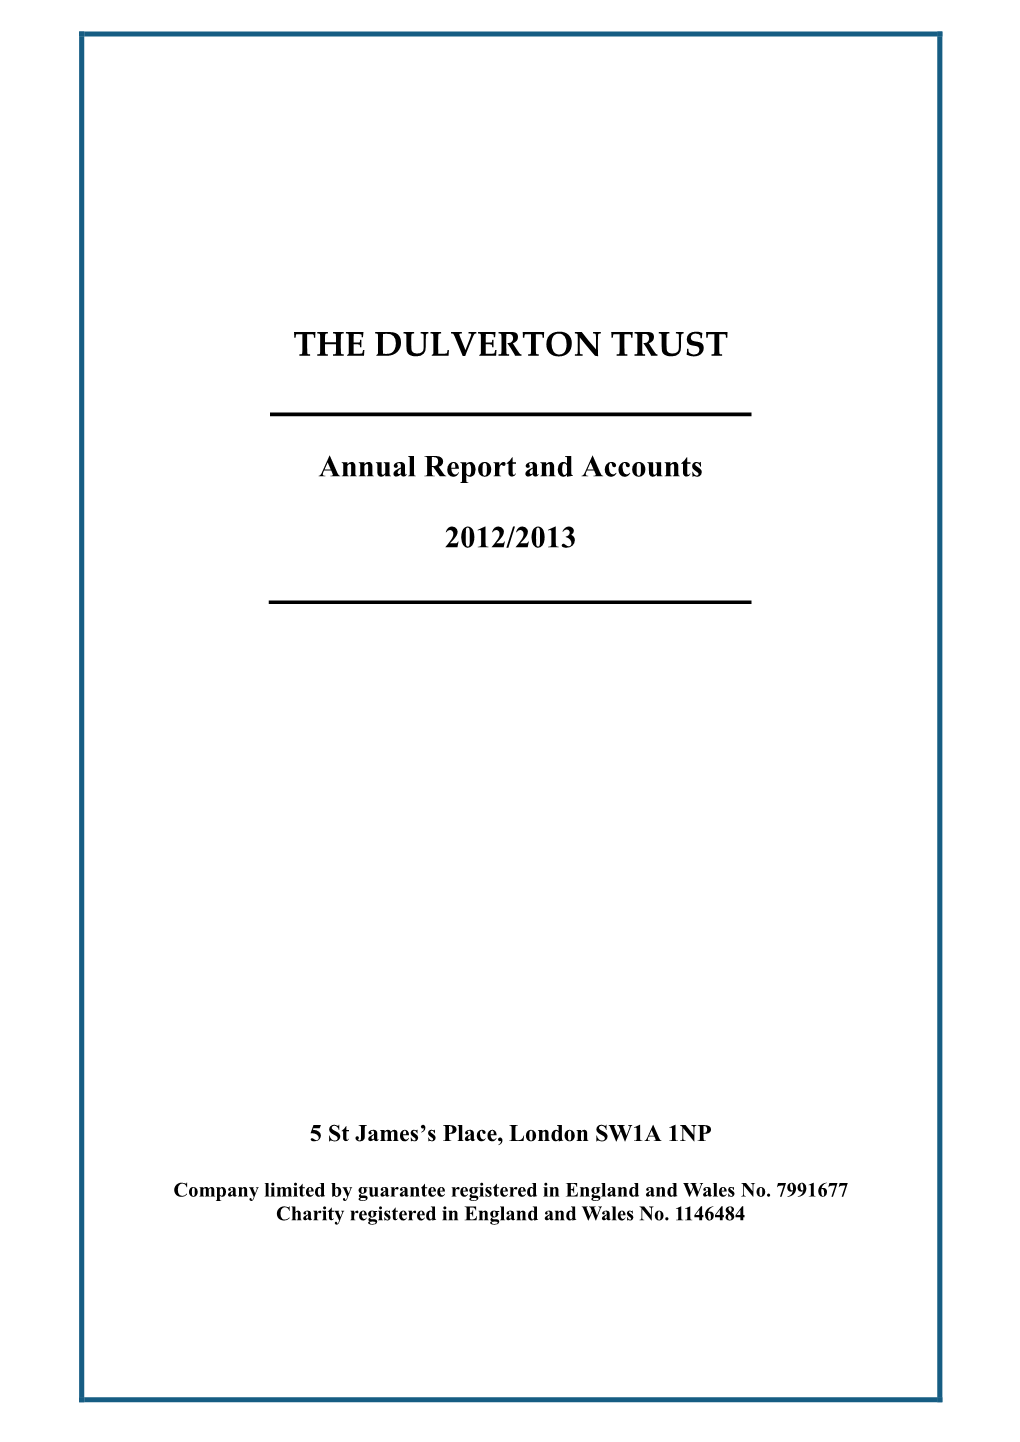 Annual Report and Accounts 2012/2013